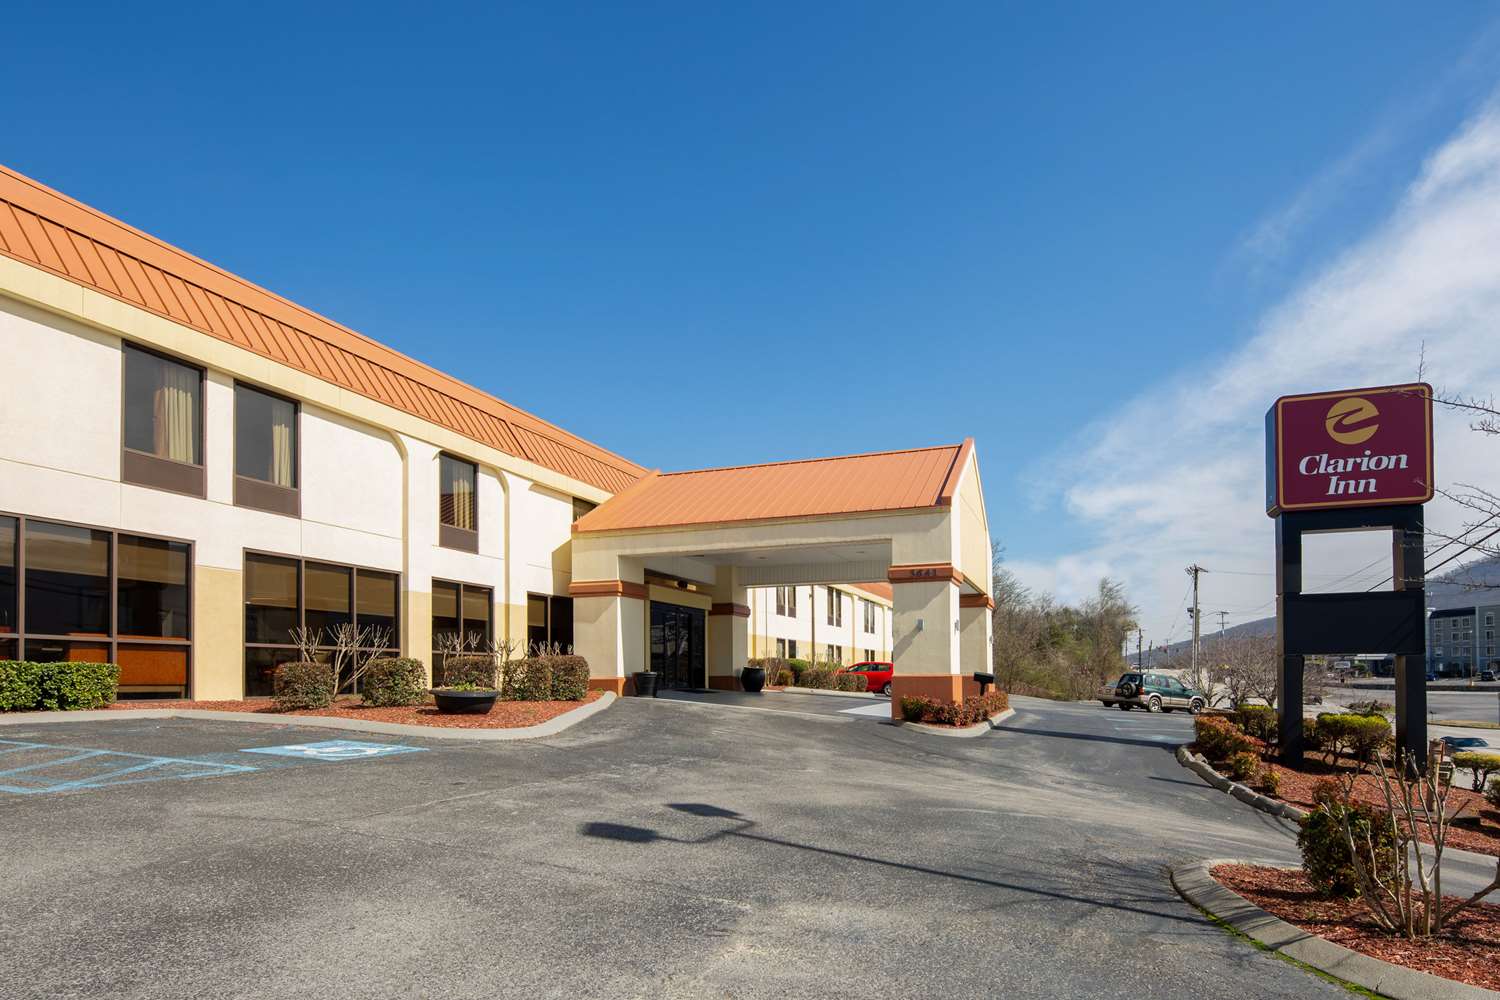 Pet Friendly Clarion Inn in Chattanooga, Tennessee